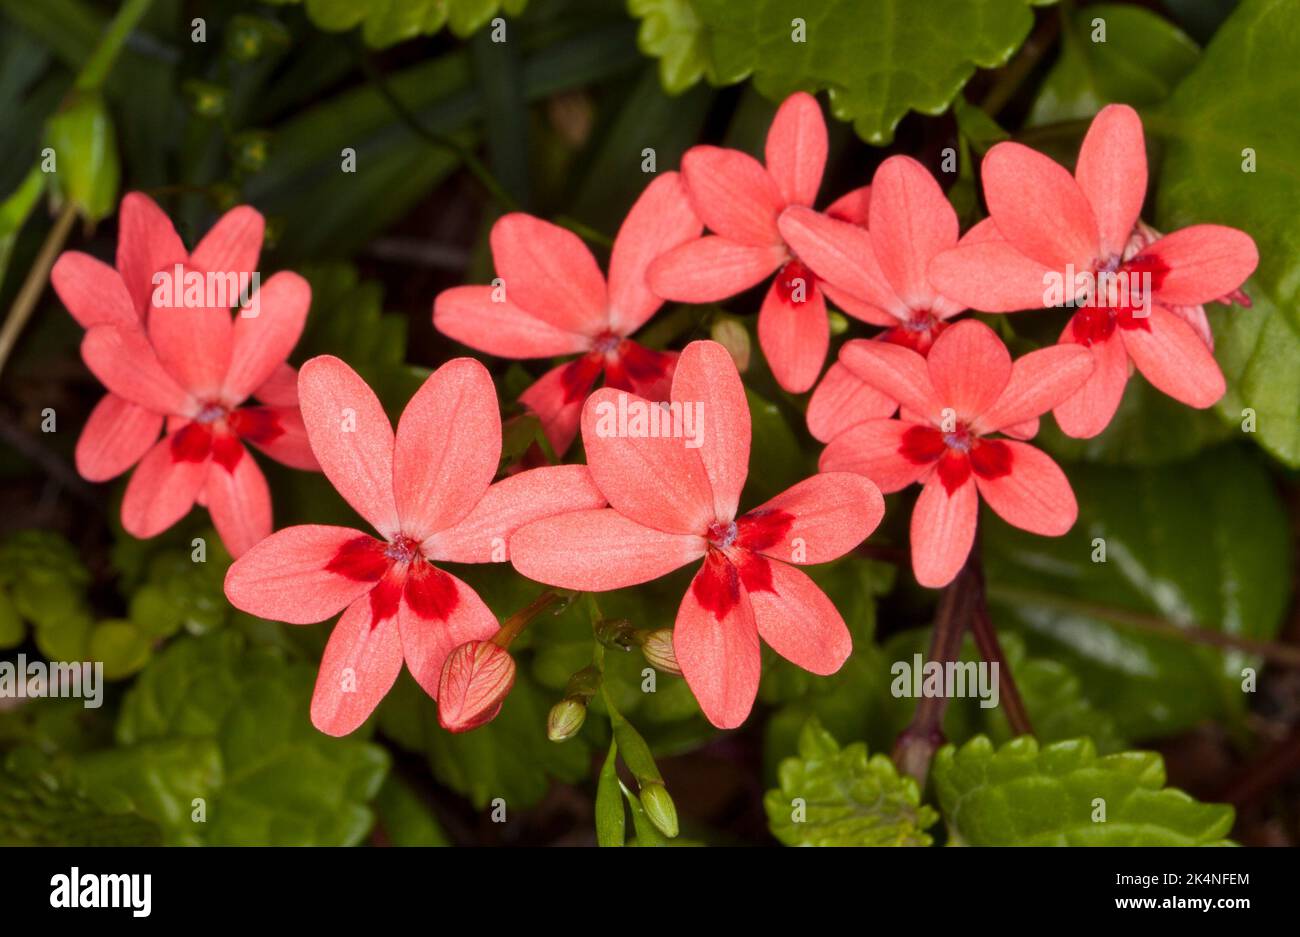 Cluster of deep pink flowers of Freesia laxa, tropical freesia, on background of green leaves, in an Australian garden. Stock Photo